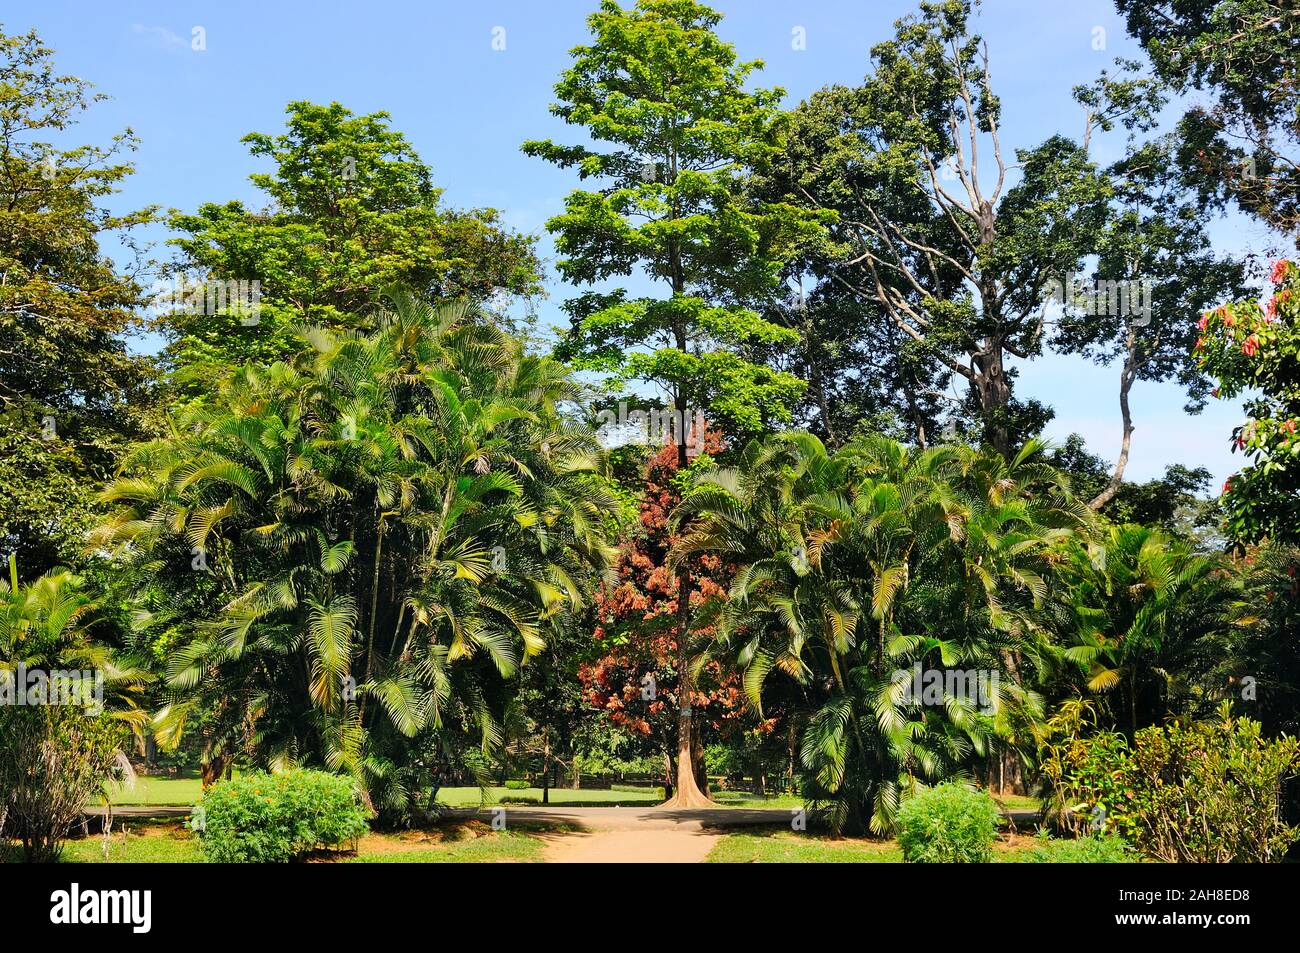 Tropical palm trees and other deciduous trees in a city park Stock Photo